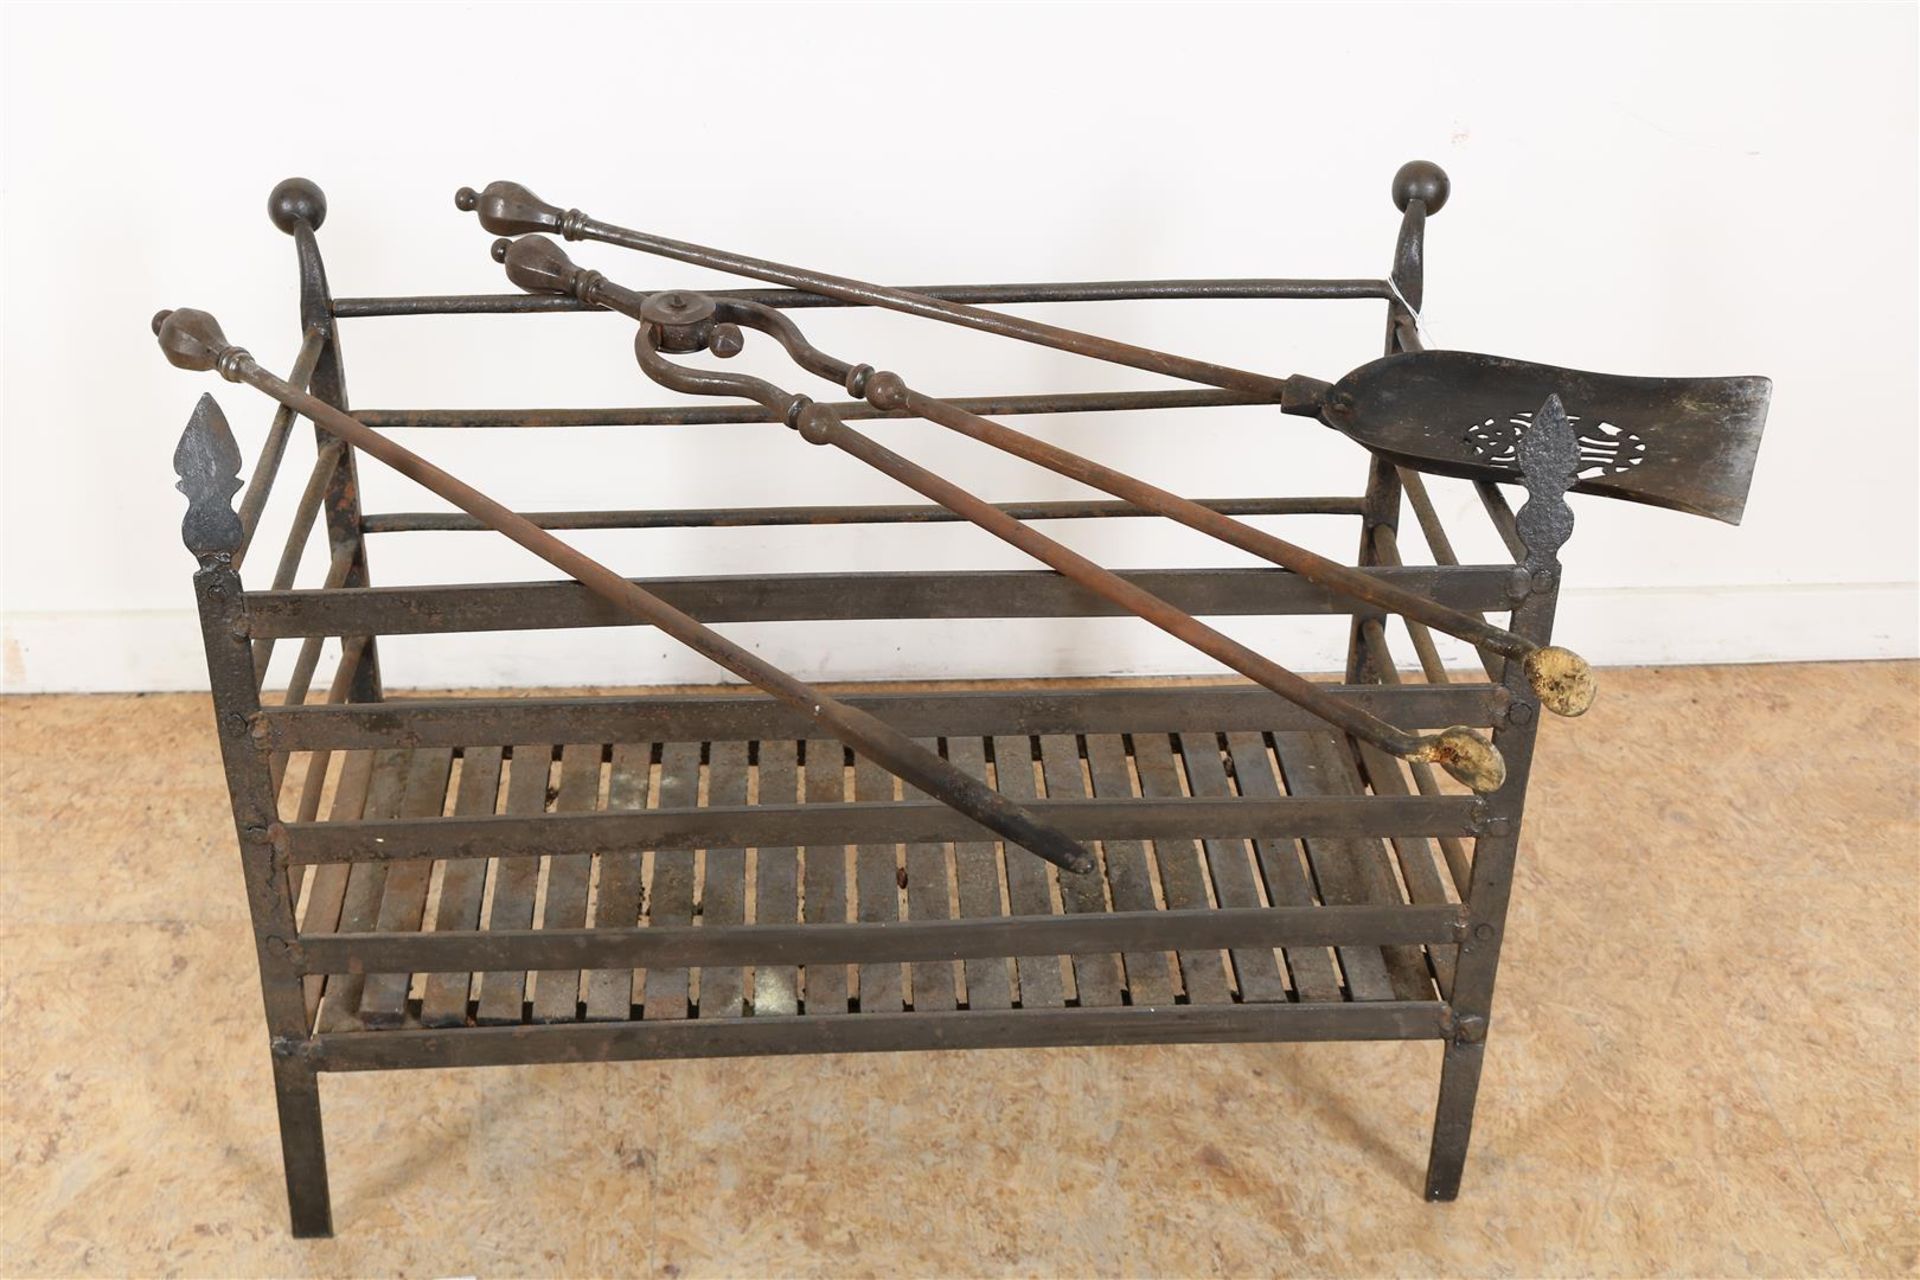 Wrought iron fireplace grate with 3 piece fireplace set, including shovel and tongs, 45 x 57 x 29 - Image 2 of 4